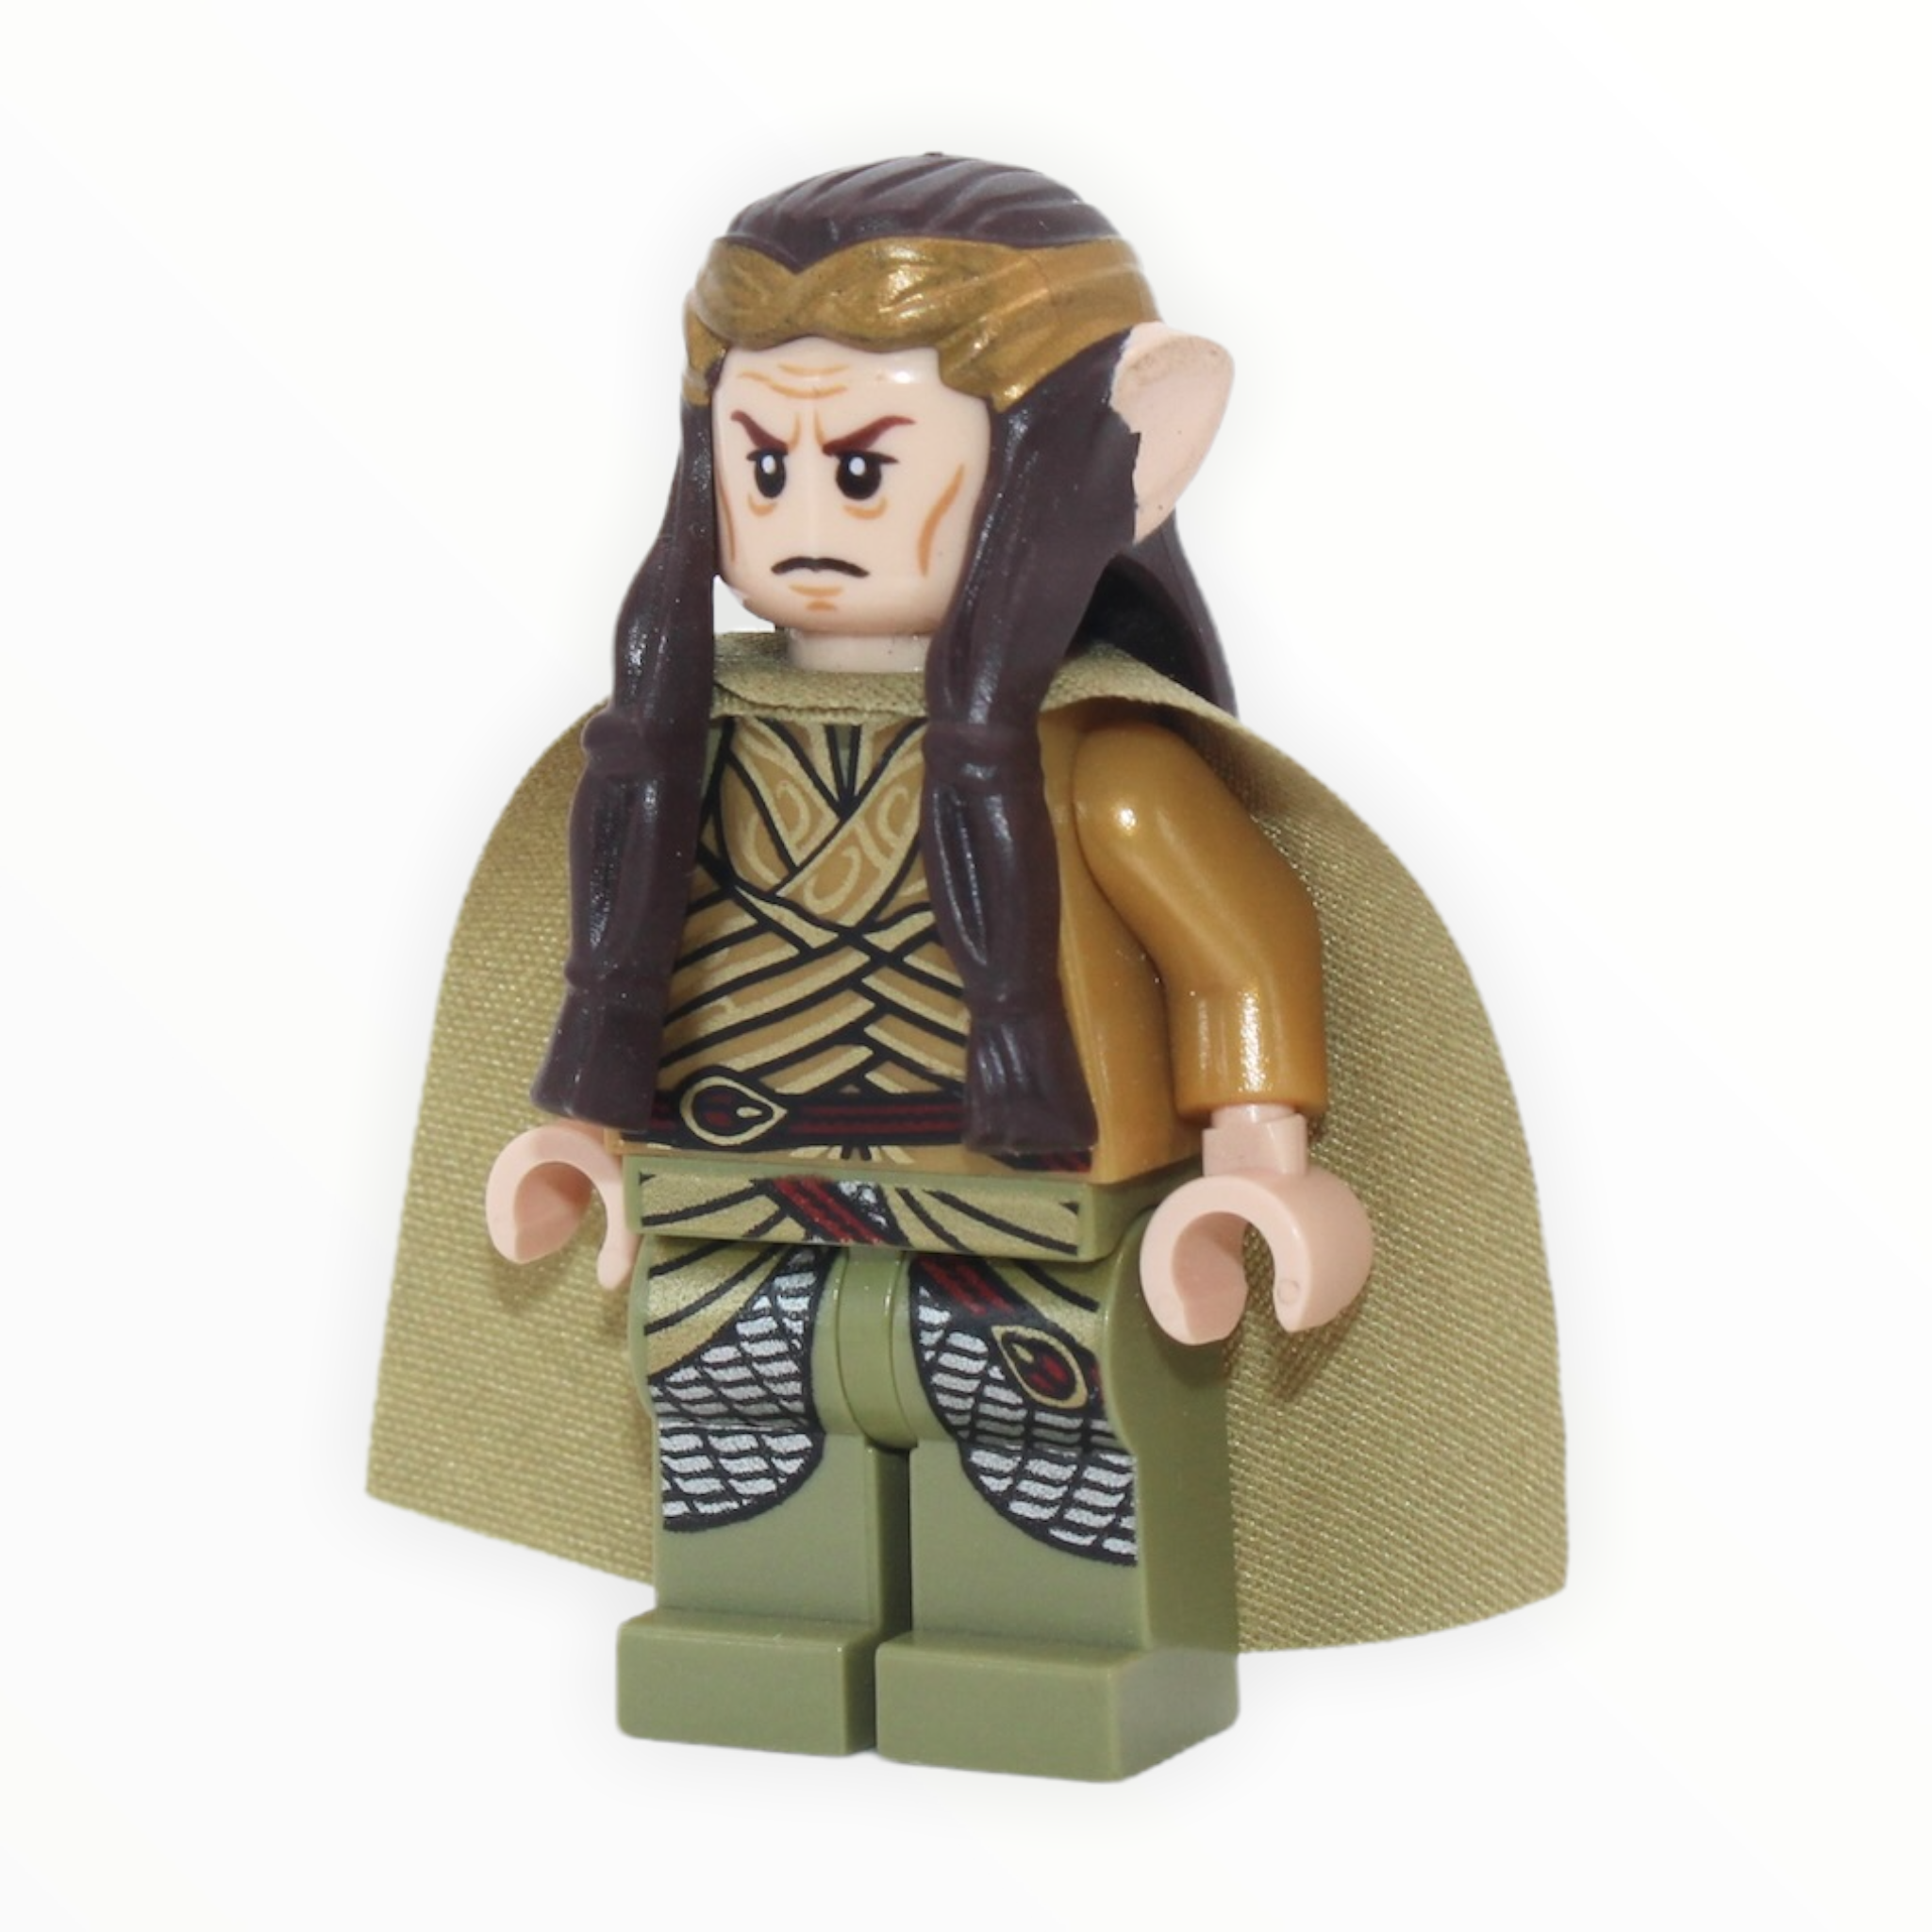 Elrond (gold crown, gold and olive green clothing, olive green cape, 2014)